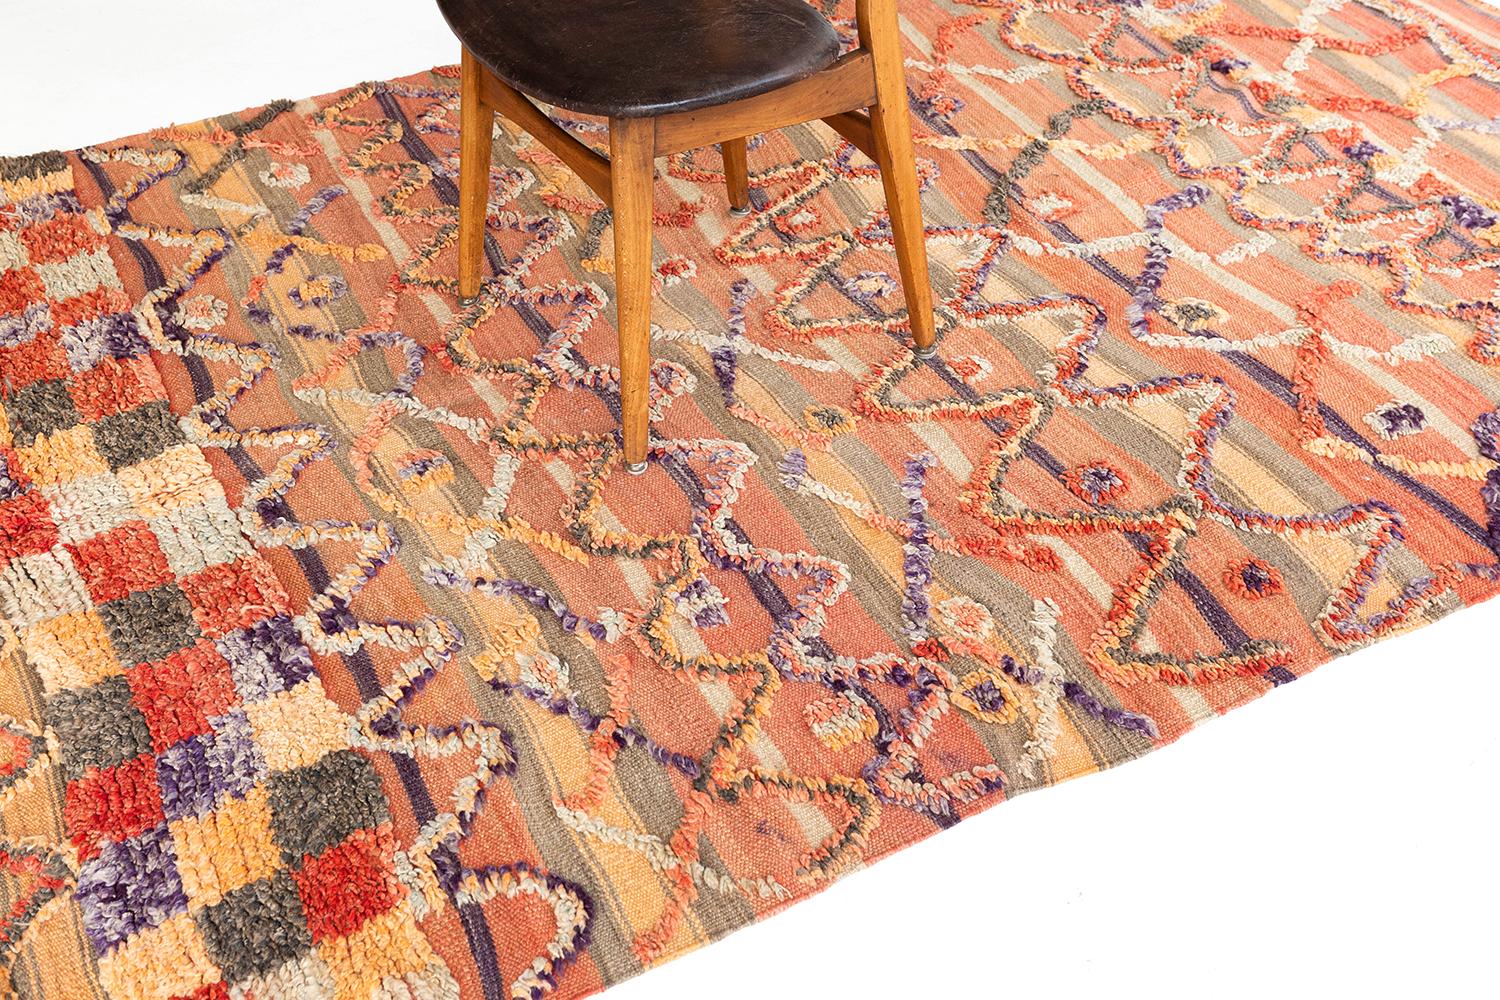 A colorful and lively vintage style Moroccan Kilim. This unique flat-weave is embossed with the perfect colorful wools that create an interesting texture in addition to the rug's symbolic and tribal design elements. This vintage piece will add